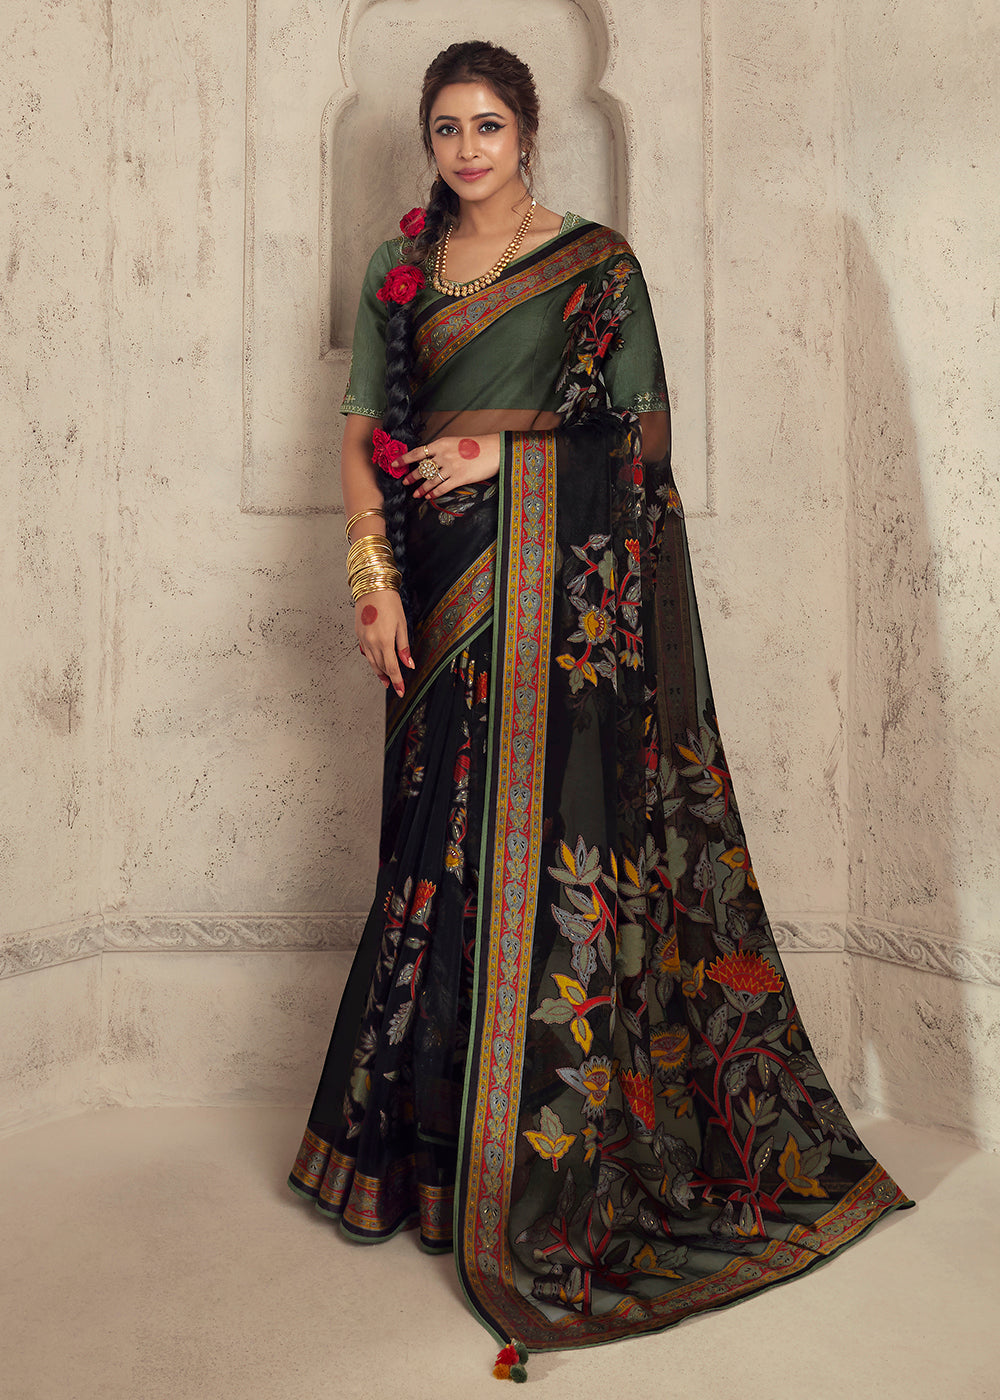 Buy Now Black Soft Organza Brasso Embroidered Wedding Festive Saree Online in USA, UK, Canada & Worldwide at Empress Clothing.